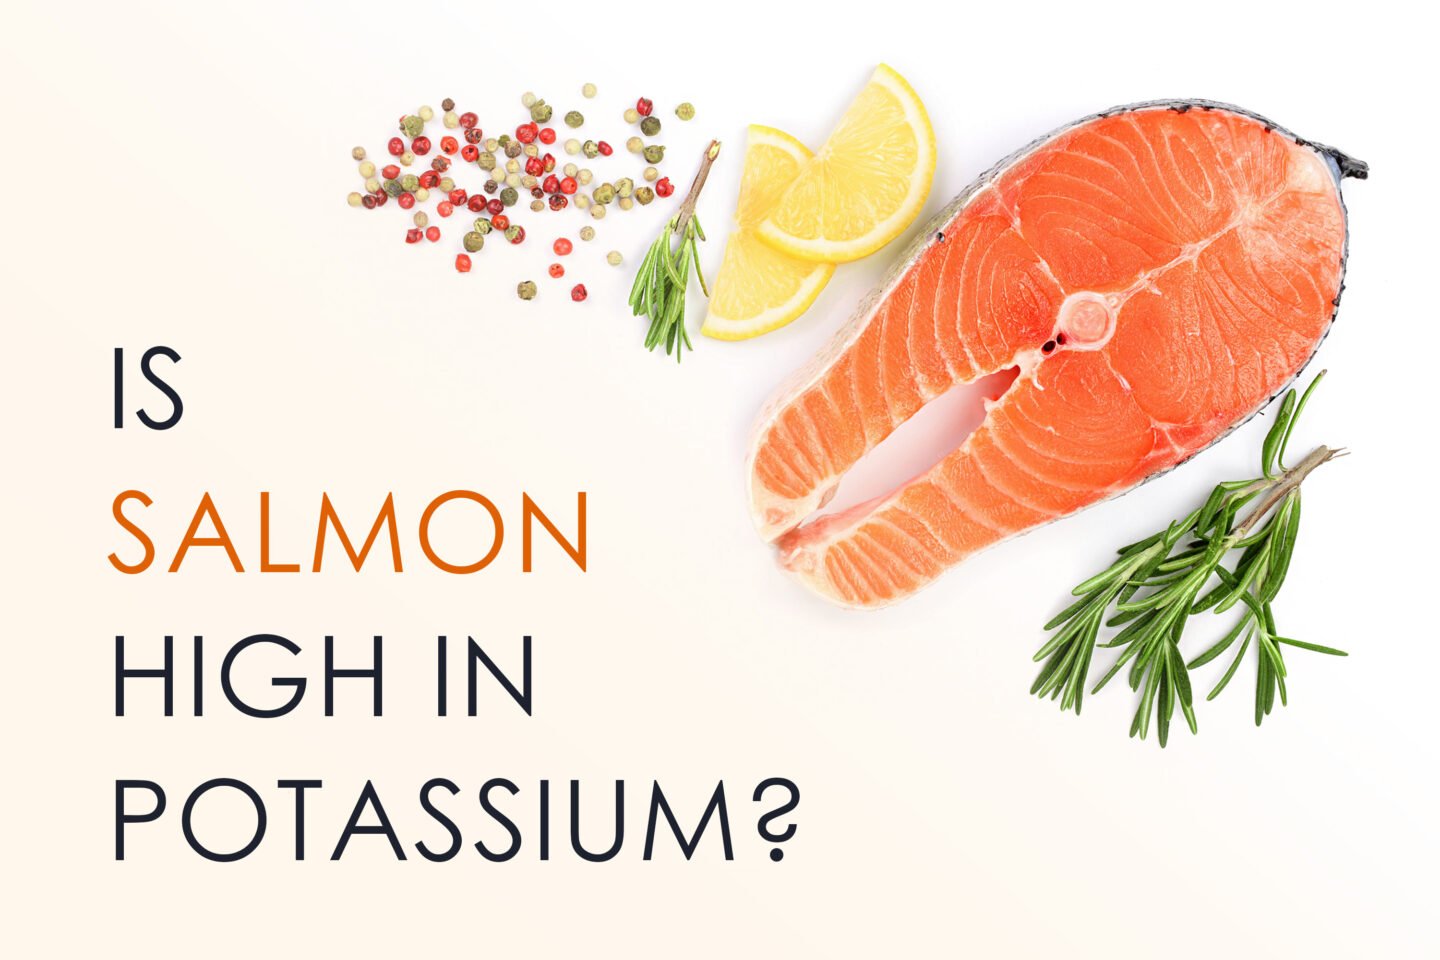 is salmon high in potassium